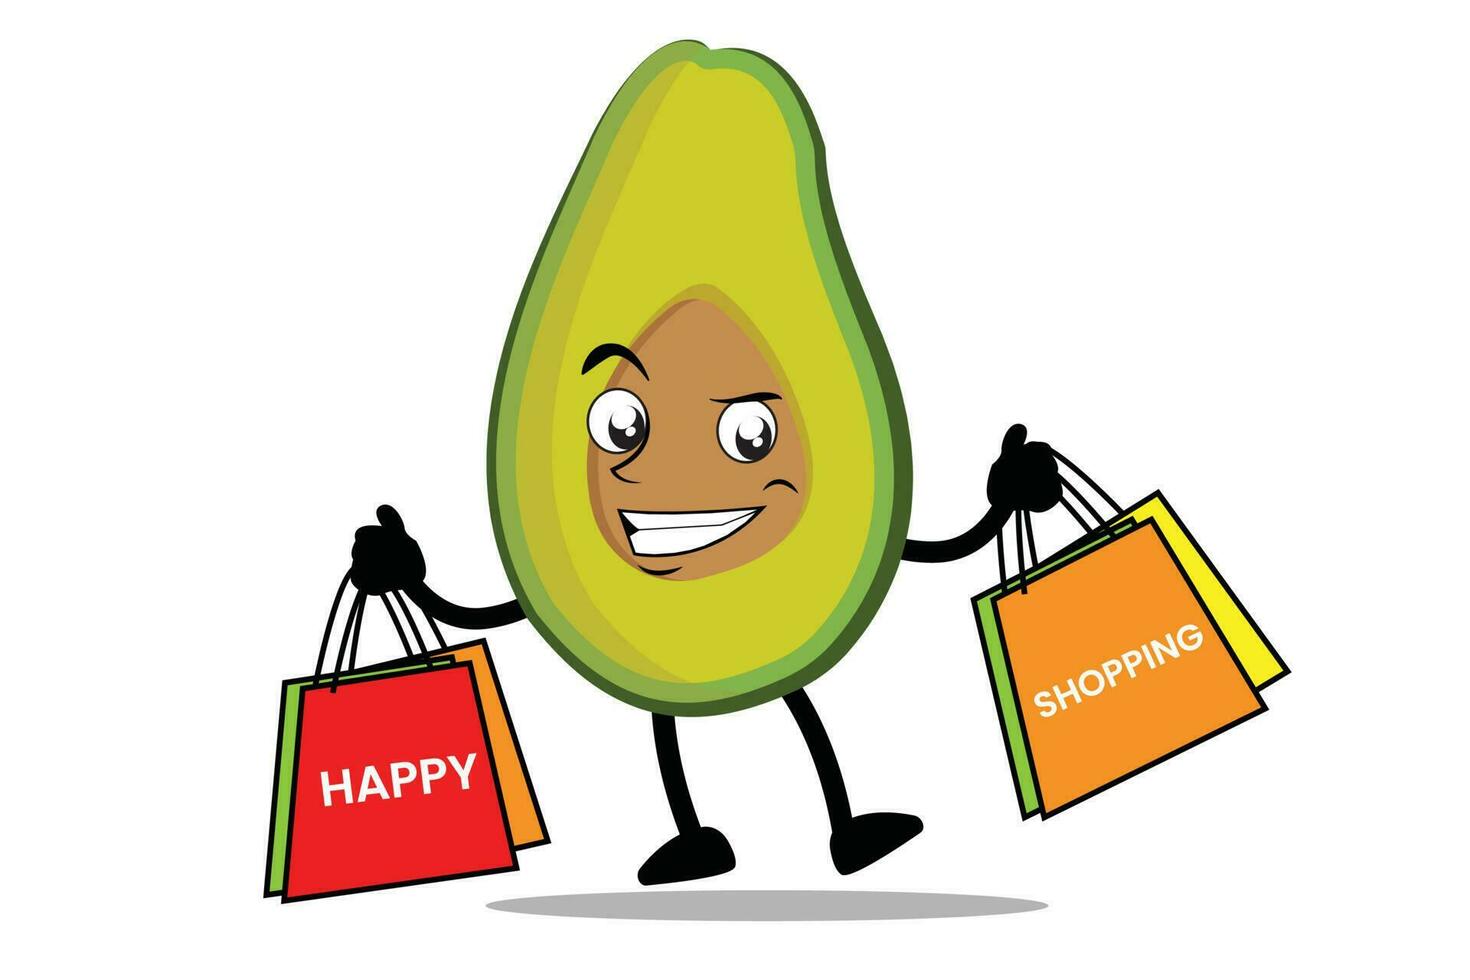 Avocado Cartoon mascot or character carry grocery bags and enjoy shopping vector